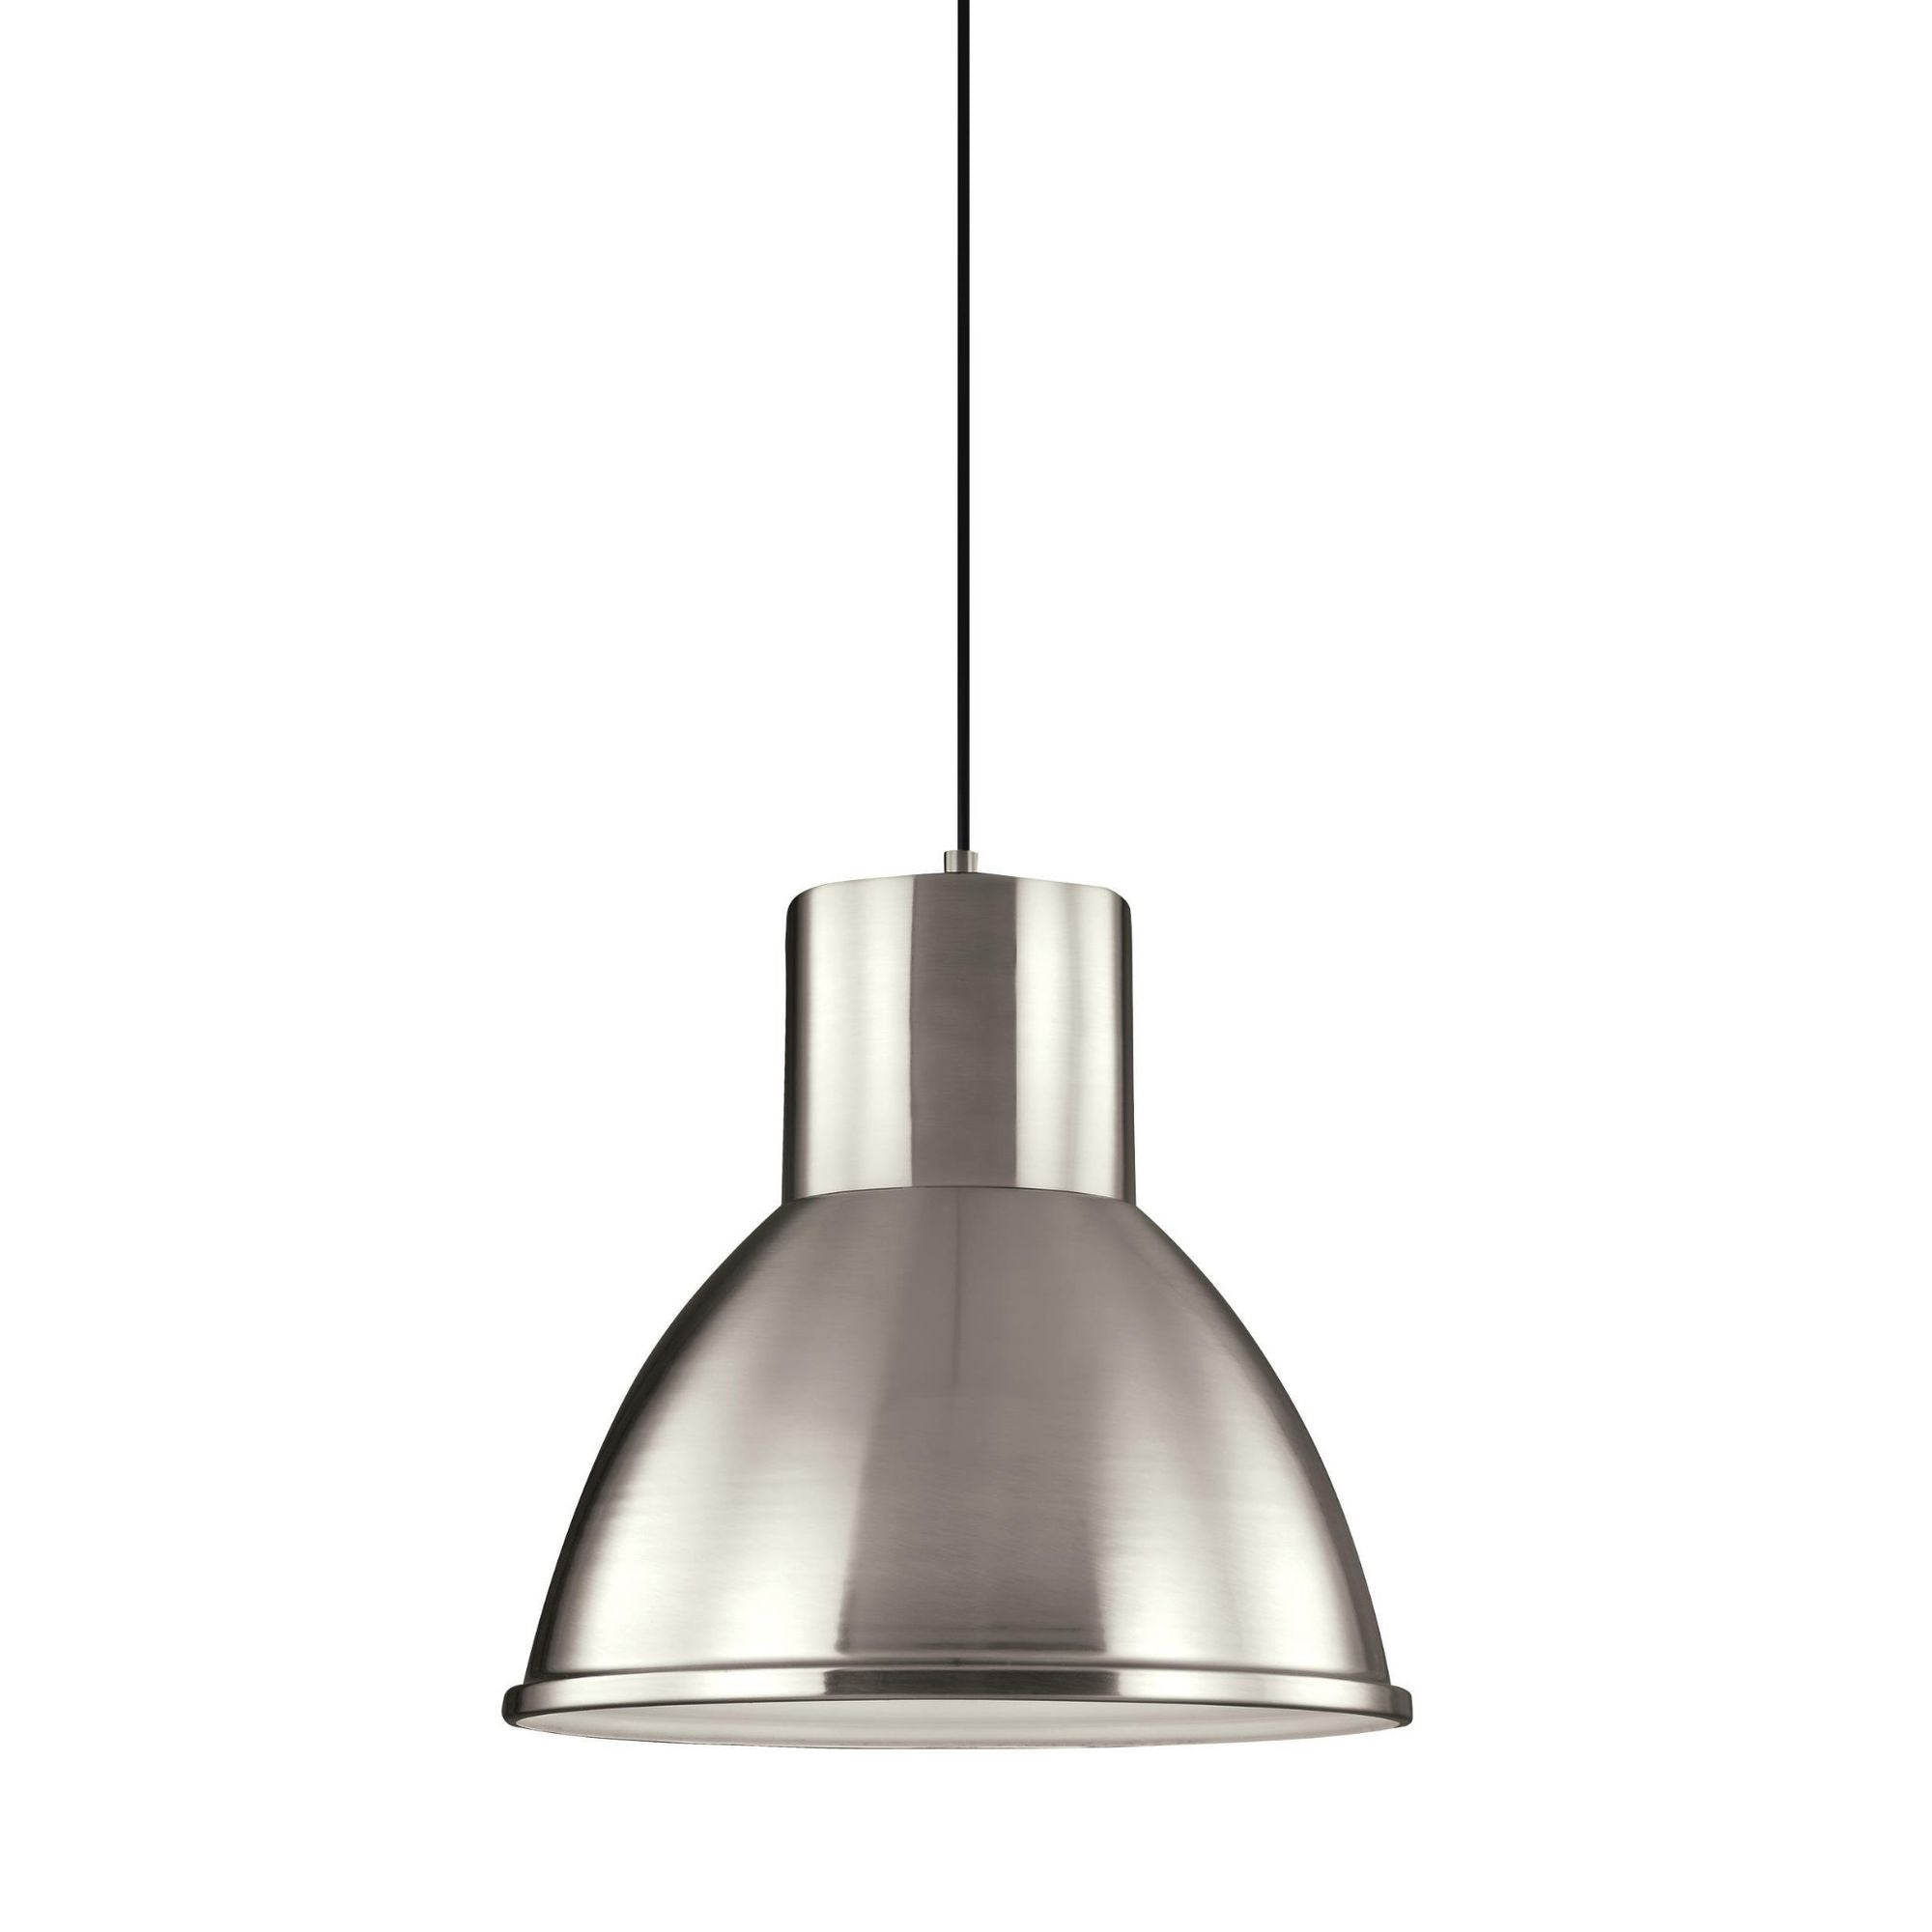 Division Street One Light Pendant LED Contemporary 14" Height Steel in Brushed Nickel